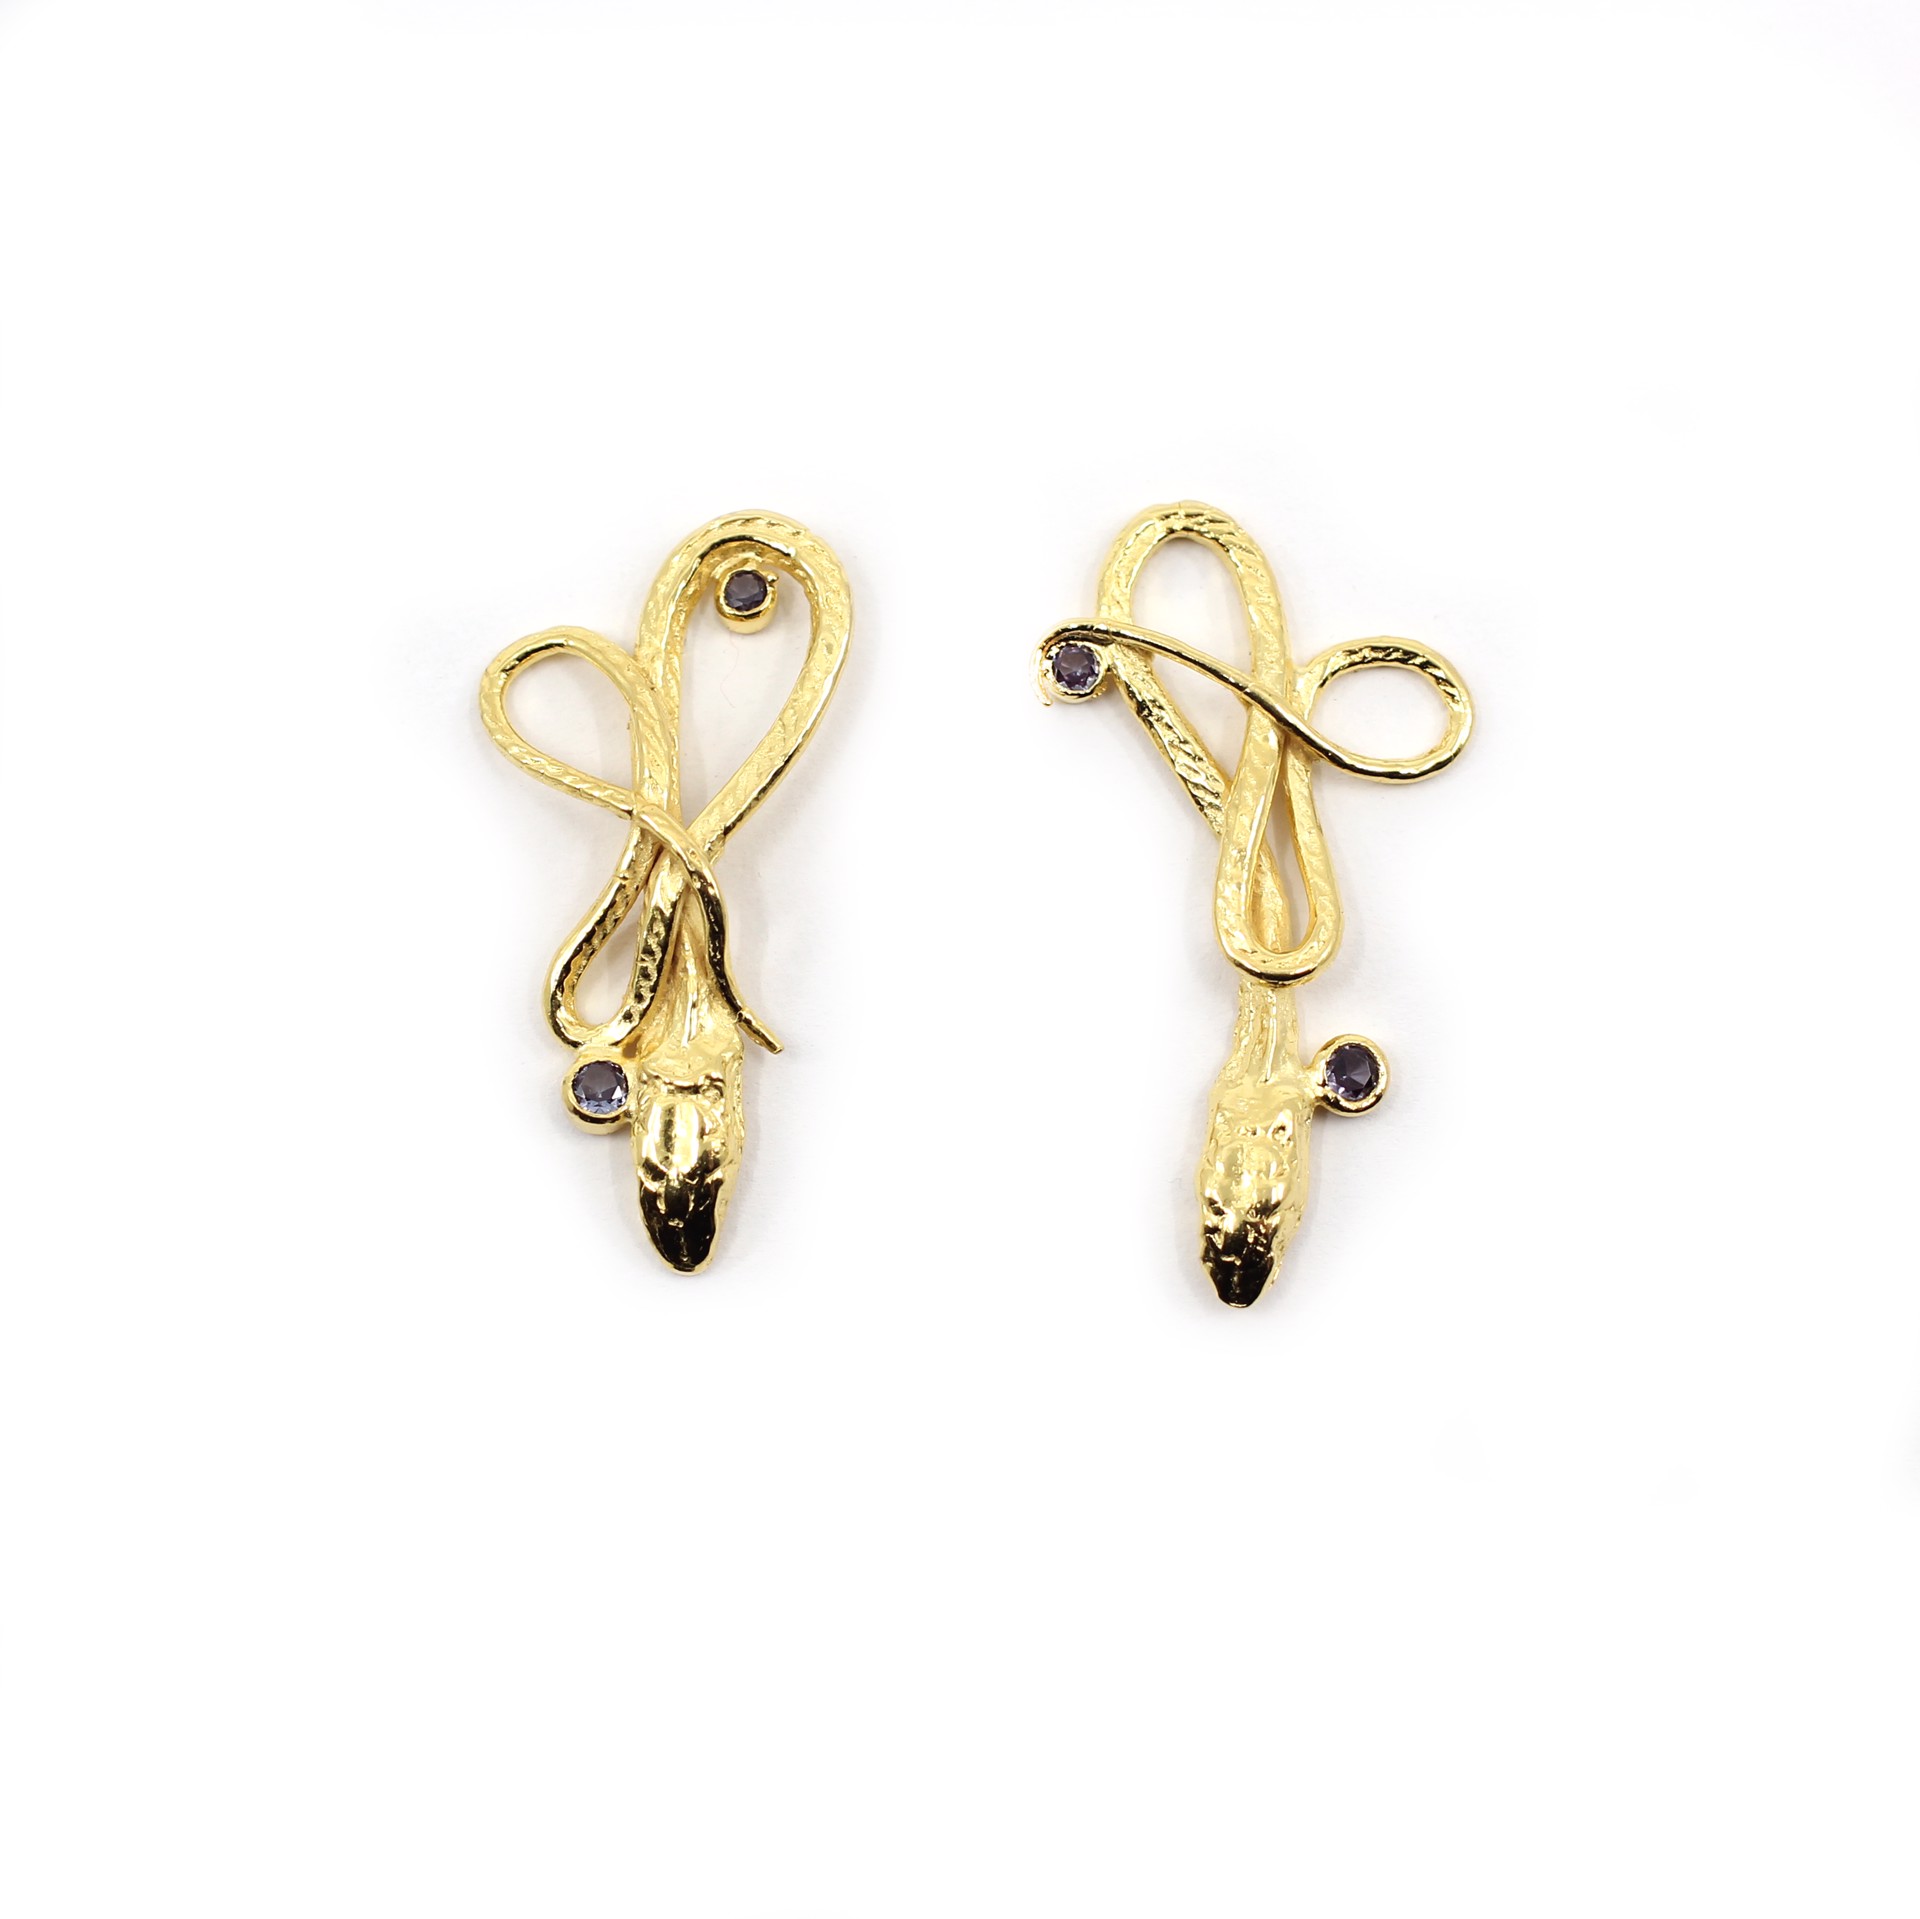 Small Gold Gemstone Serpentine Earrings by Anna Johnson